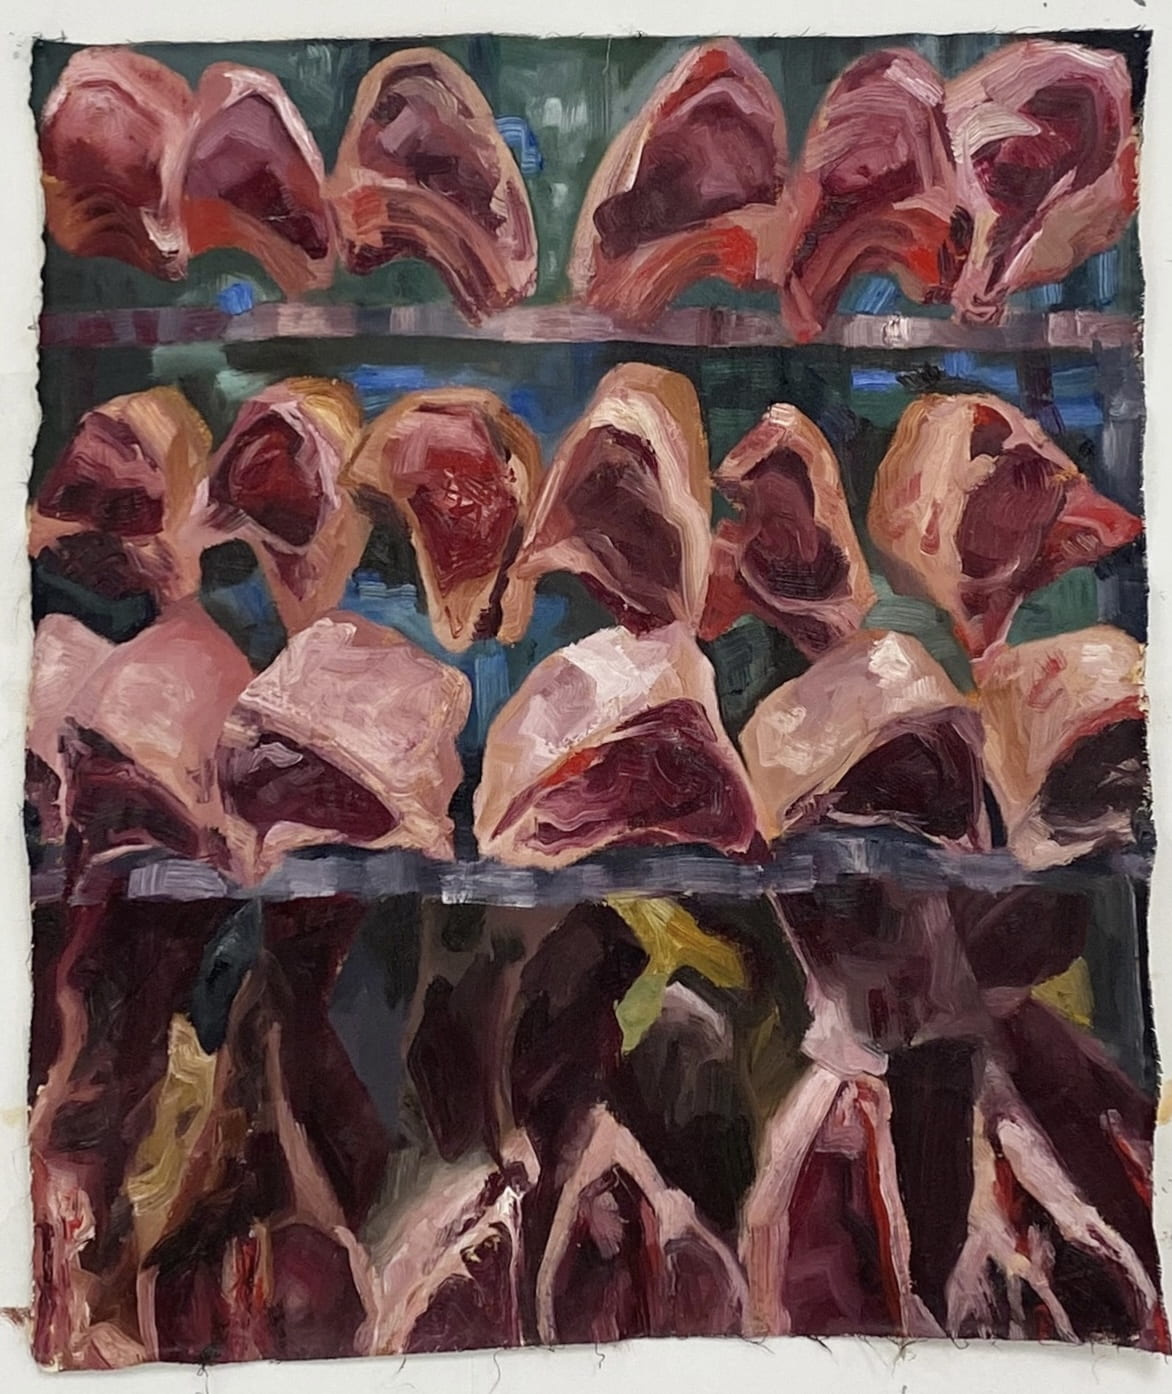 An oil painting of the window display of beef at the Hampstead Butcher.